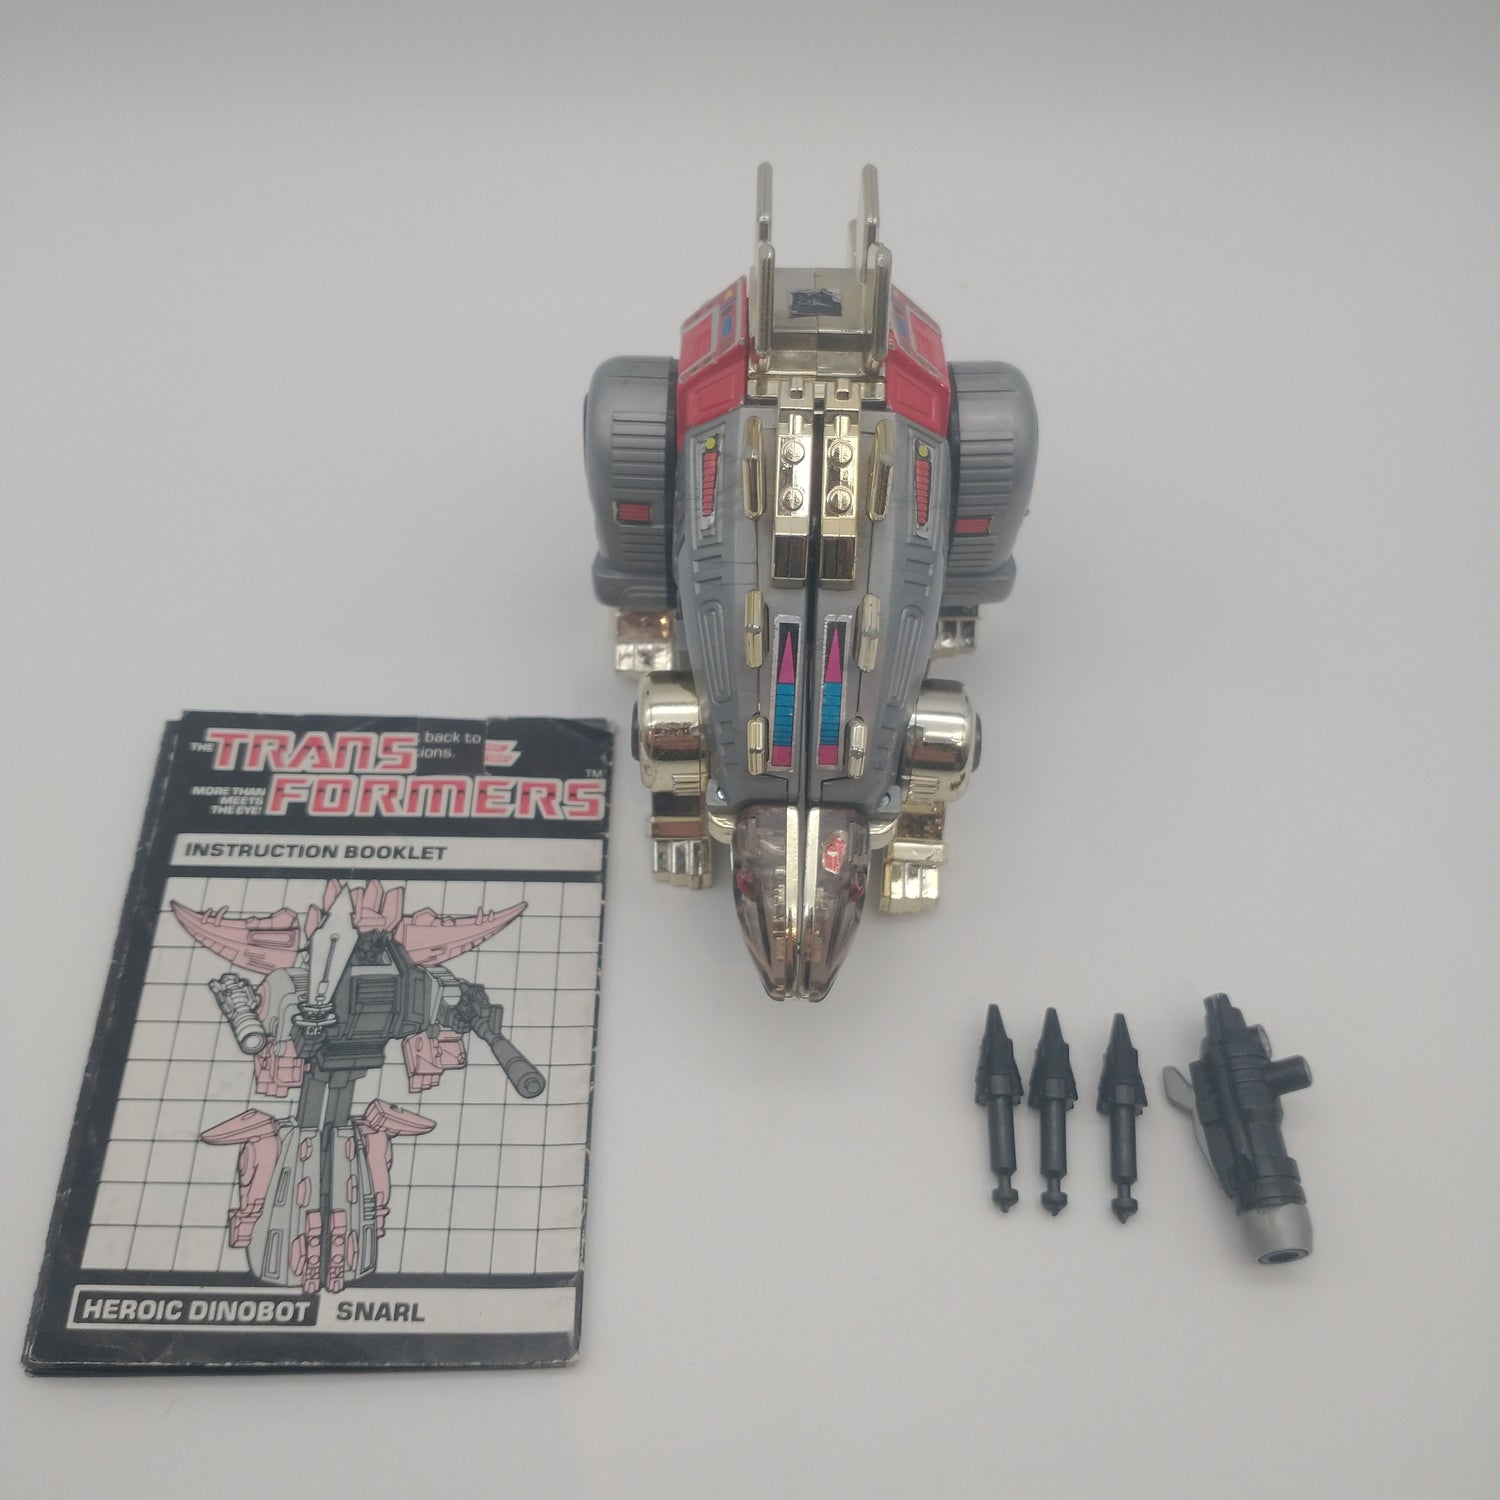 The front of the figure with accessories and manual